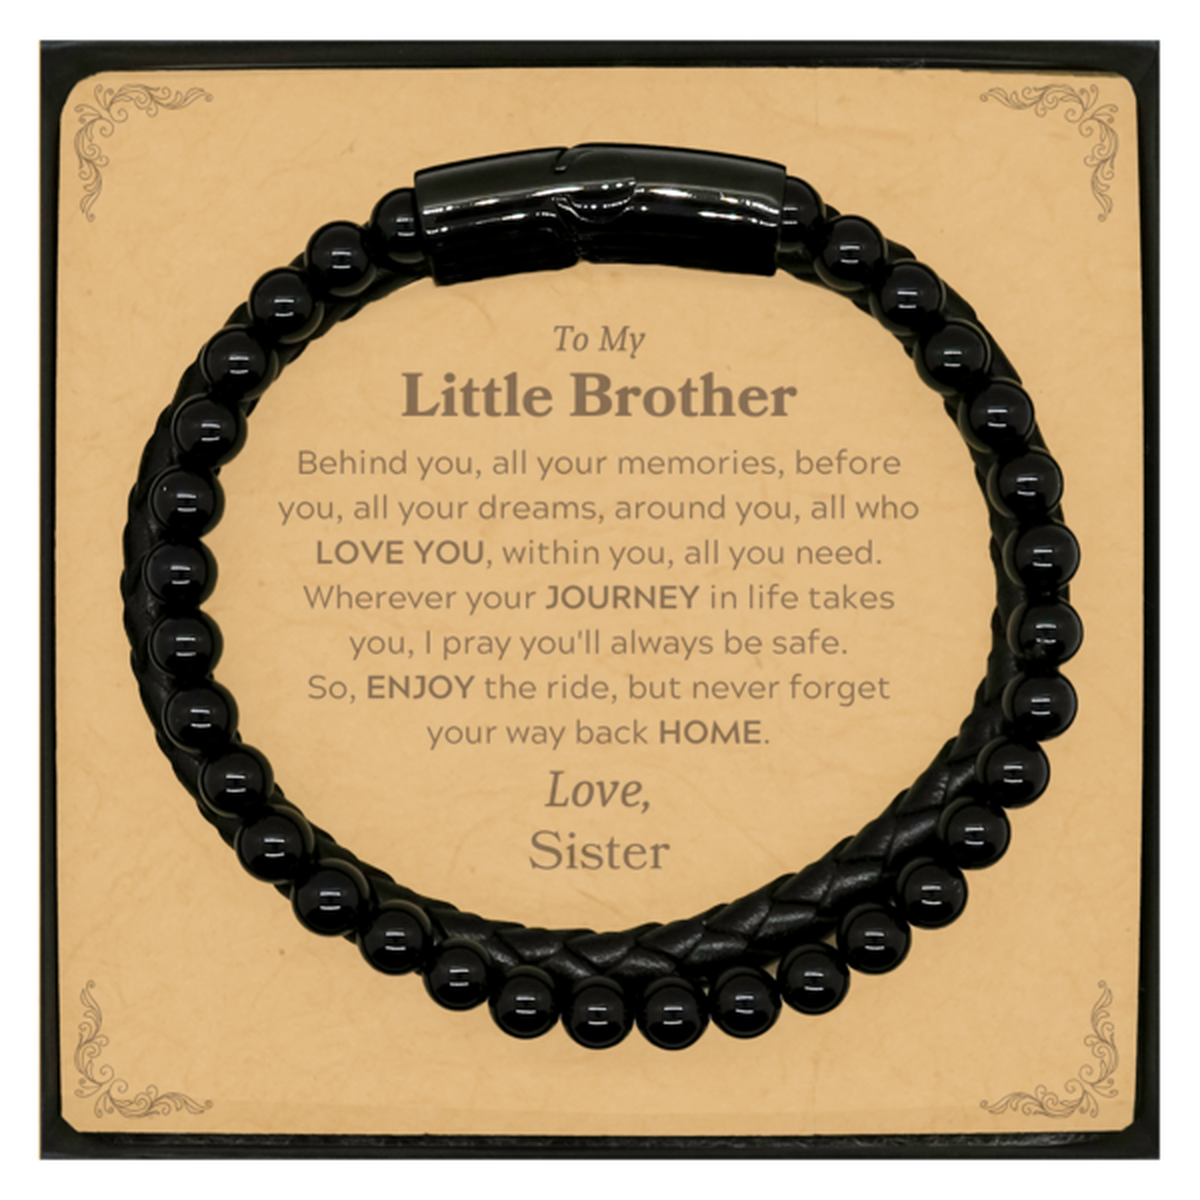 To My Little Brother Graduation Gifts from Sister, Little Brother Stone Leather Bracelets Christmas Birthday Gifts for Little Brother Behind you, all your memories, before you, all your dreams. Love, Sister